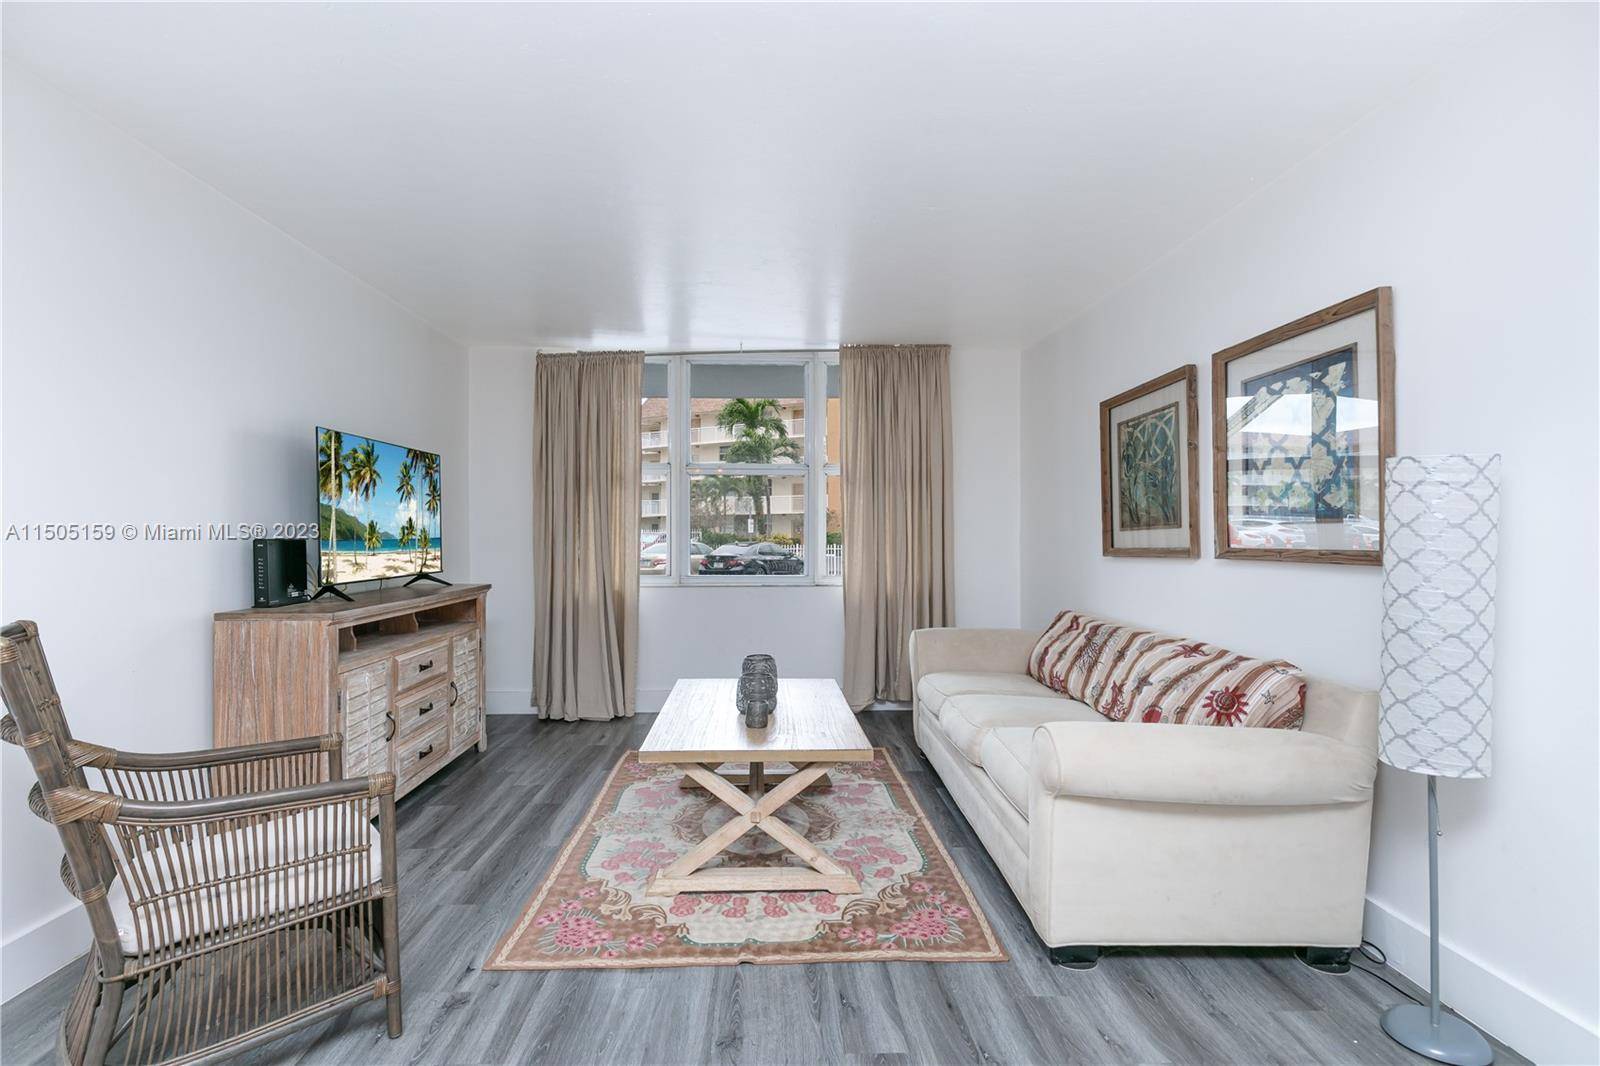 Unwind and embrace the coastal lifestyle in your very own 2 bedroom, 2 bathroom beachside oasis.